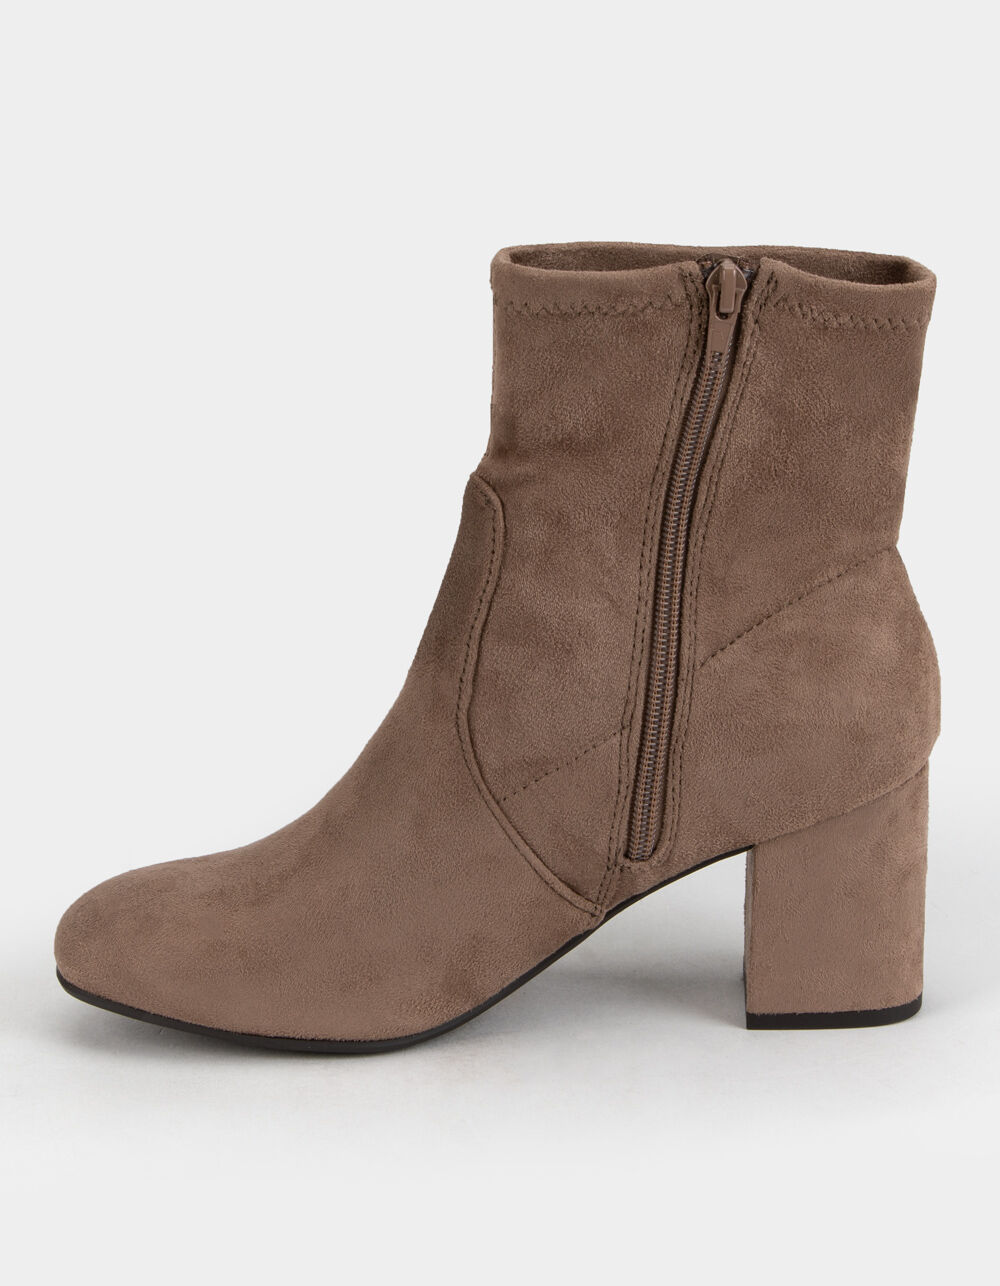 SODA Faux Suede Block Heel Womens Taupe Booties - TAUPE | Tillys